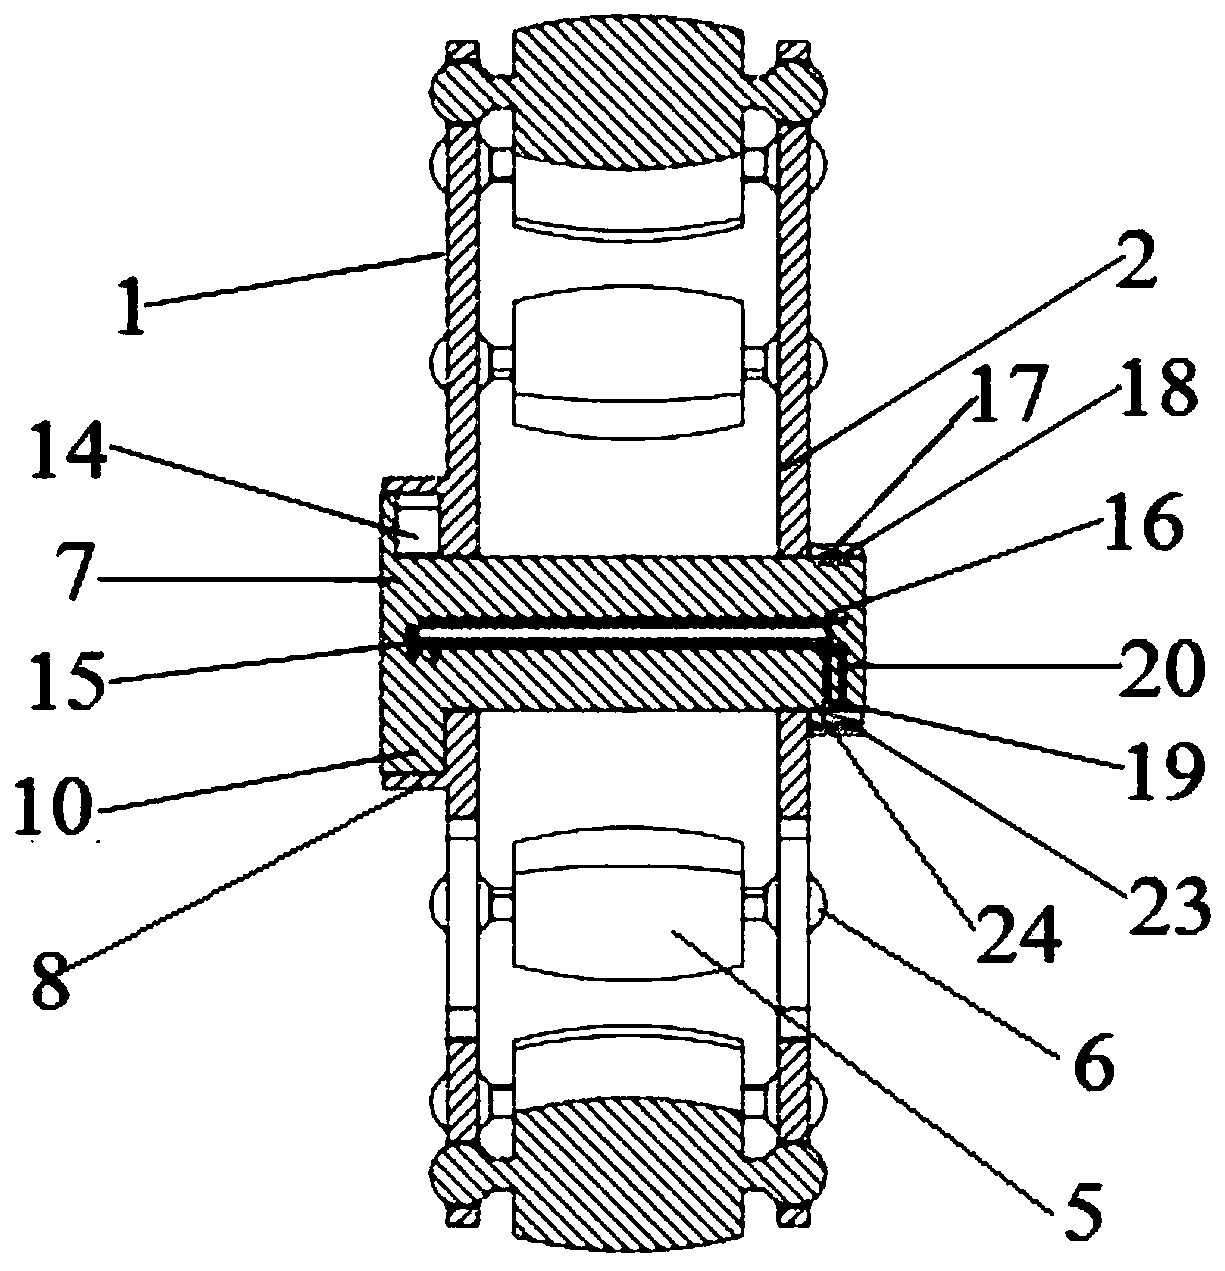 Mecanum wheel for hydraulically regulating the direction of a roller